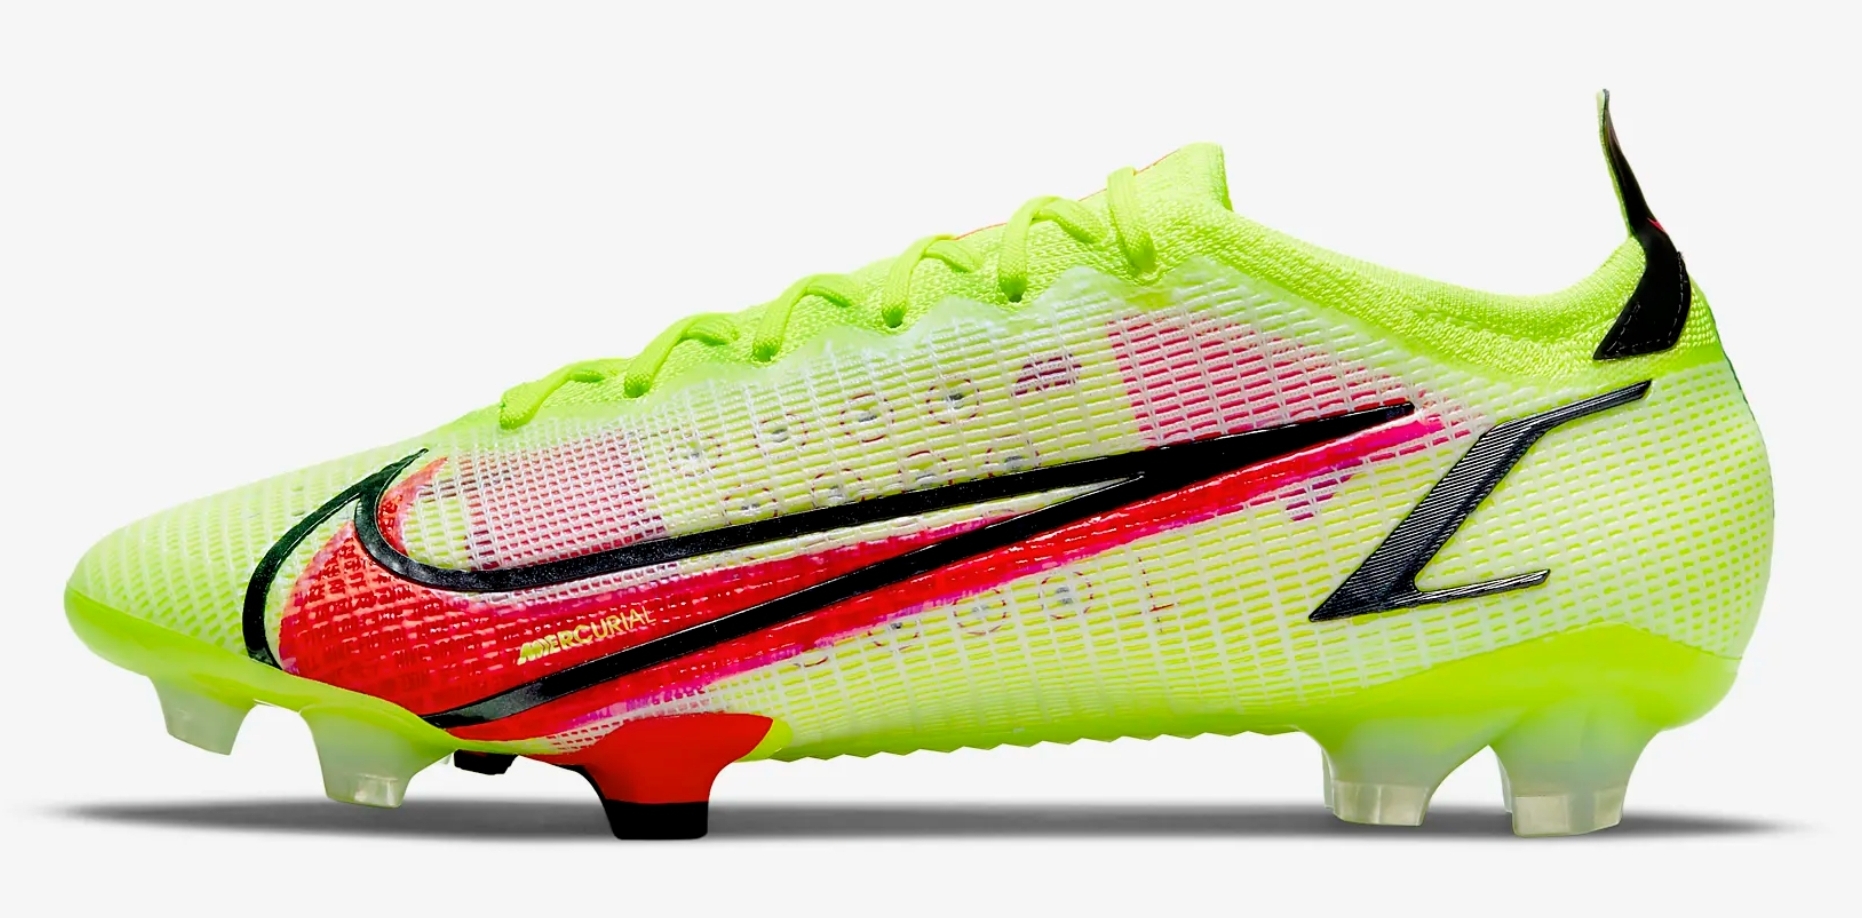 New Nike football boots for dribbling